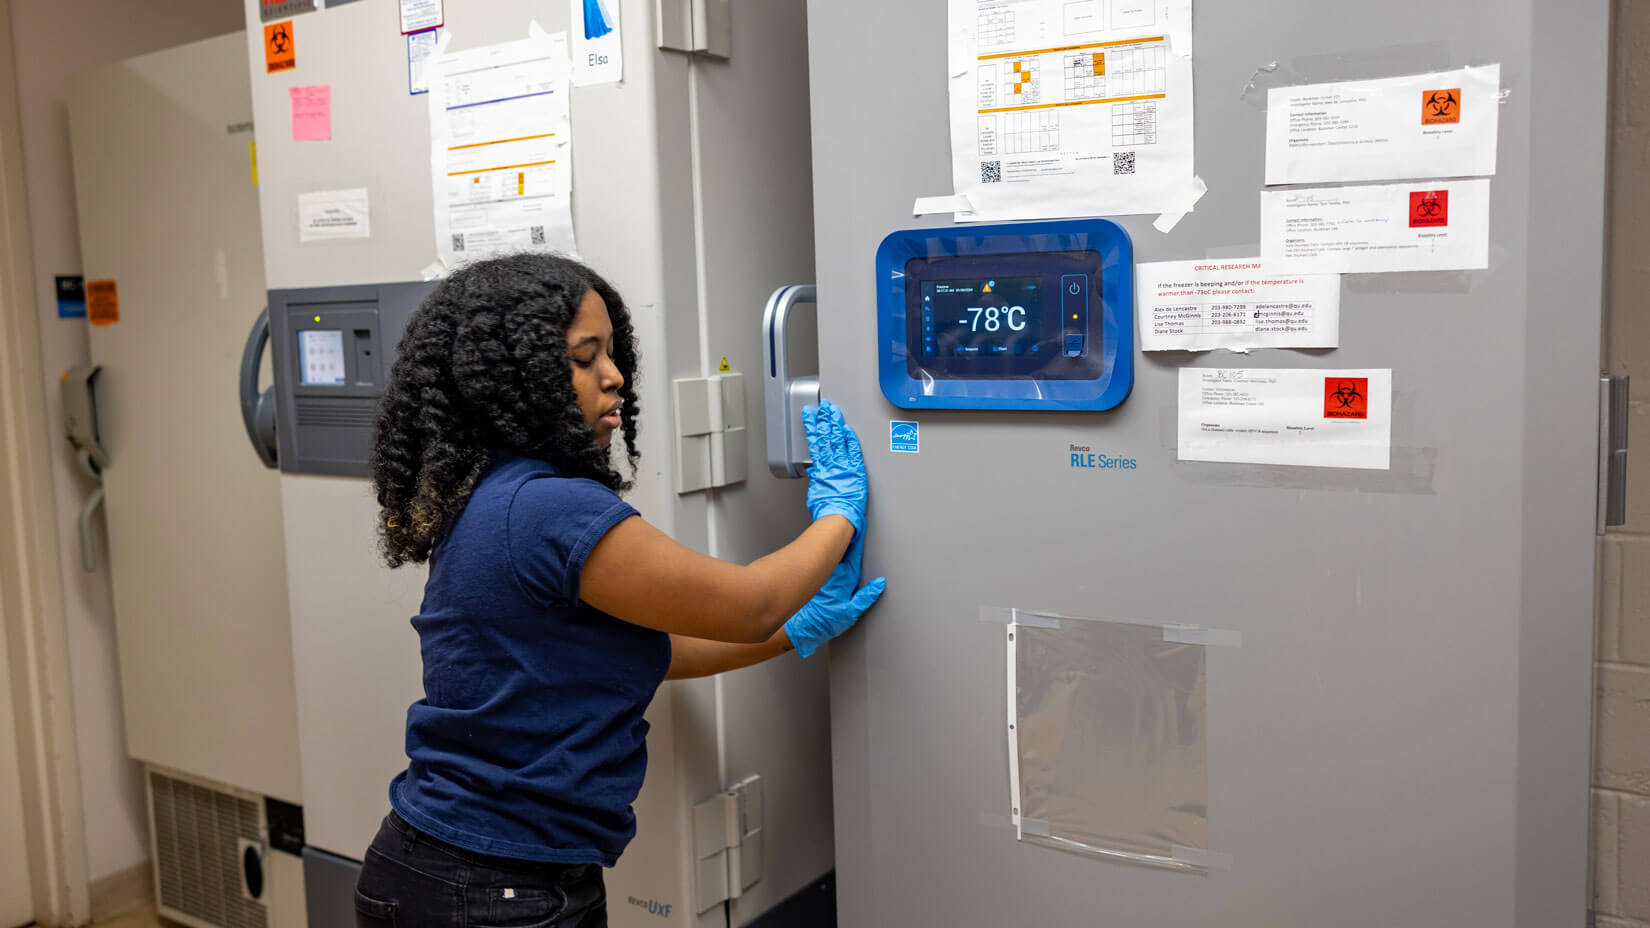 A biology student closes an industrial freezer in a classroom laboratory.